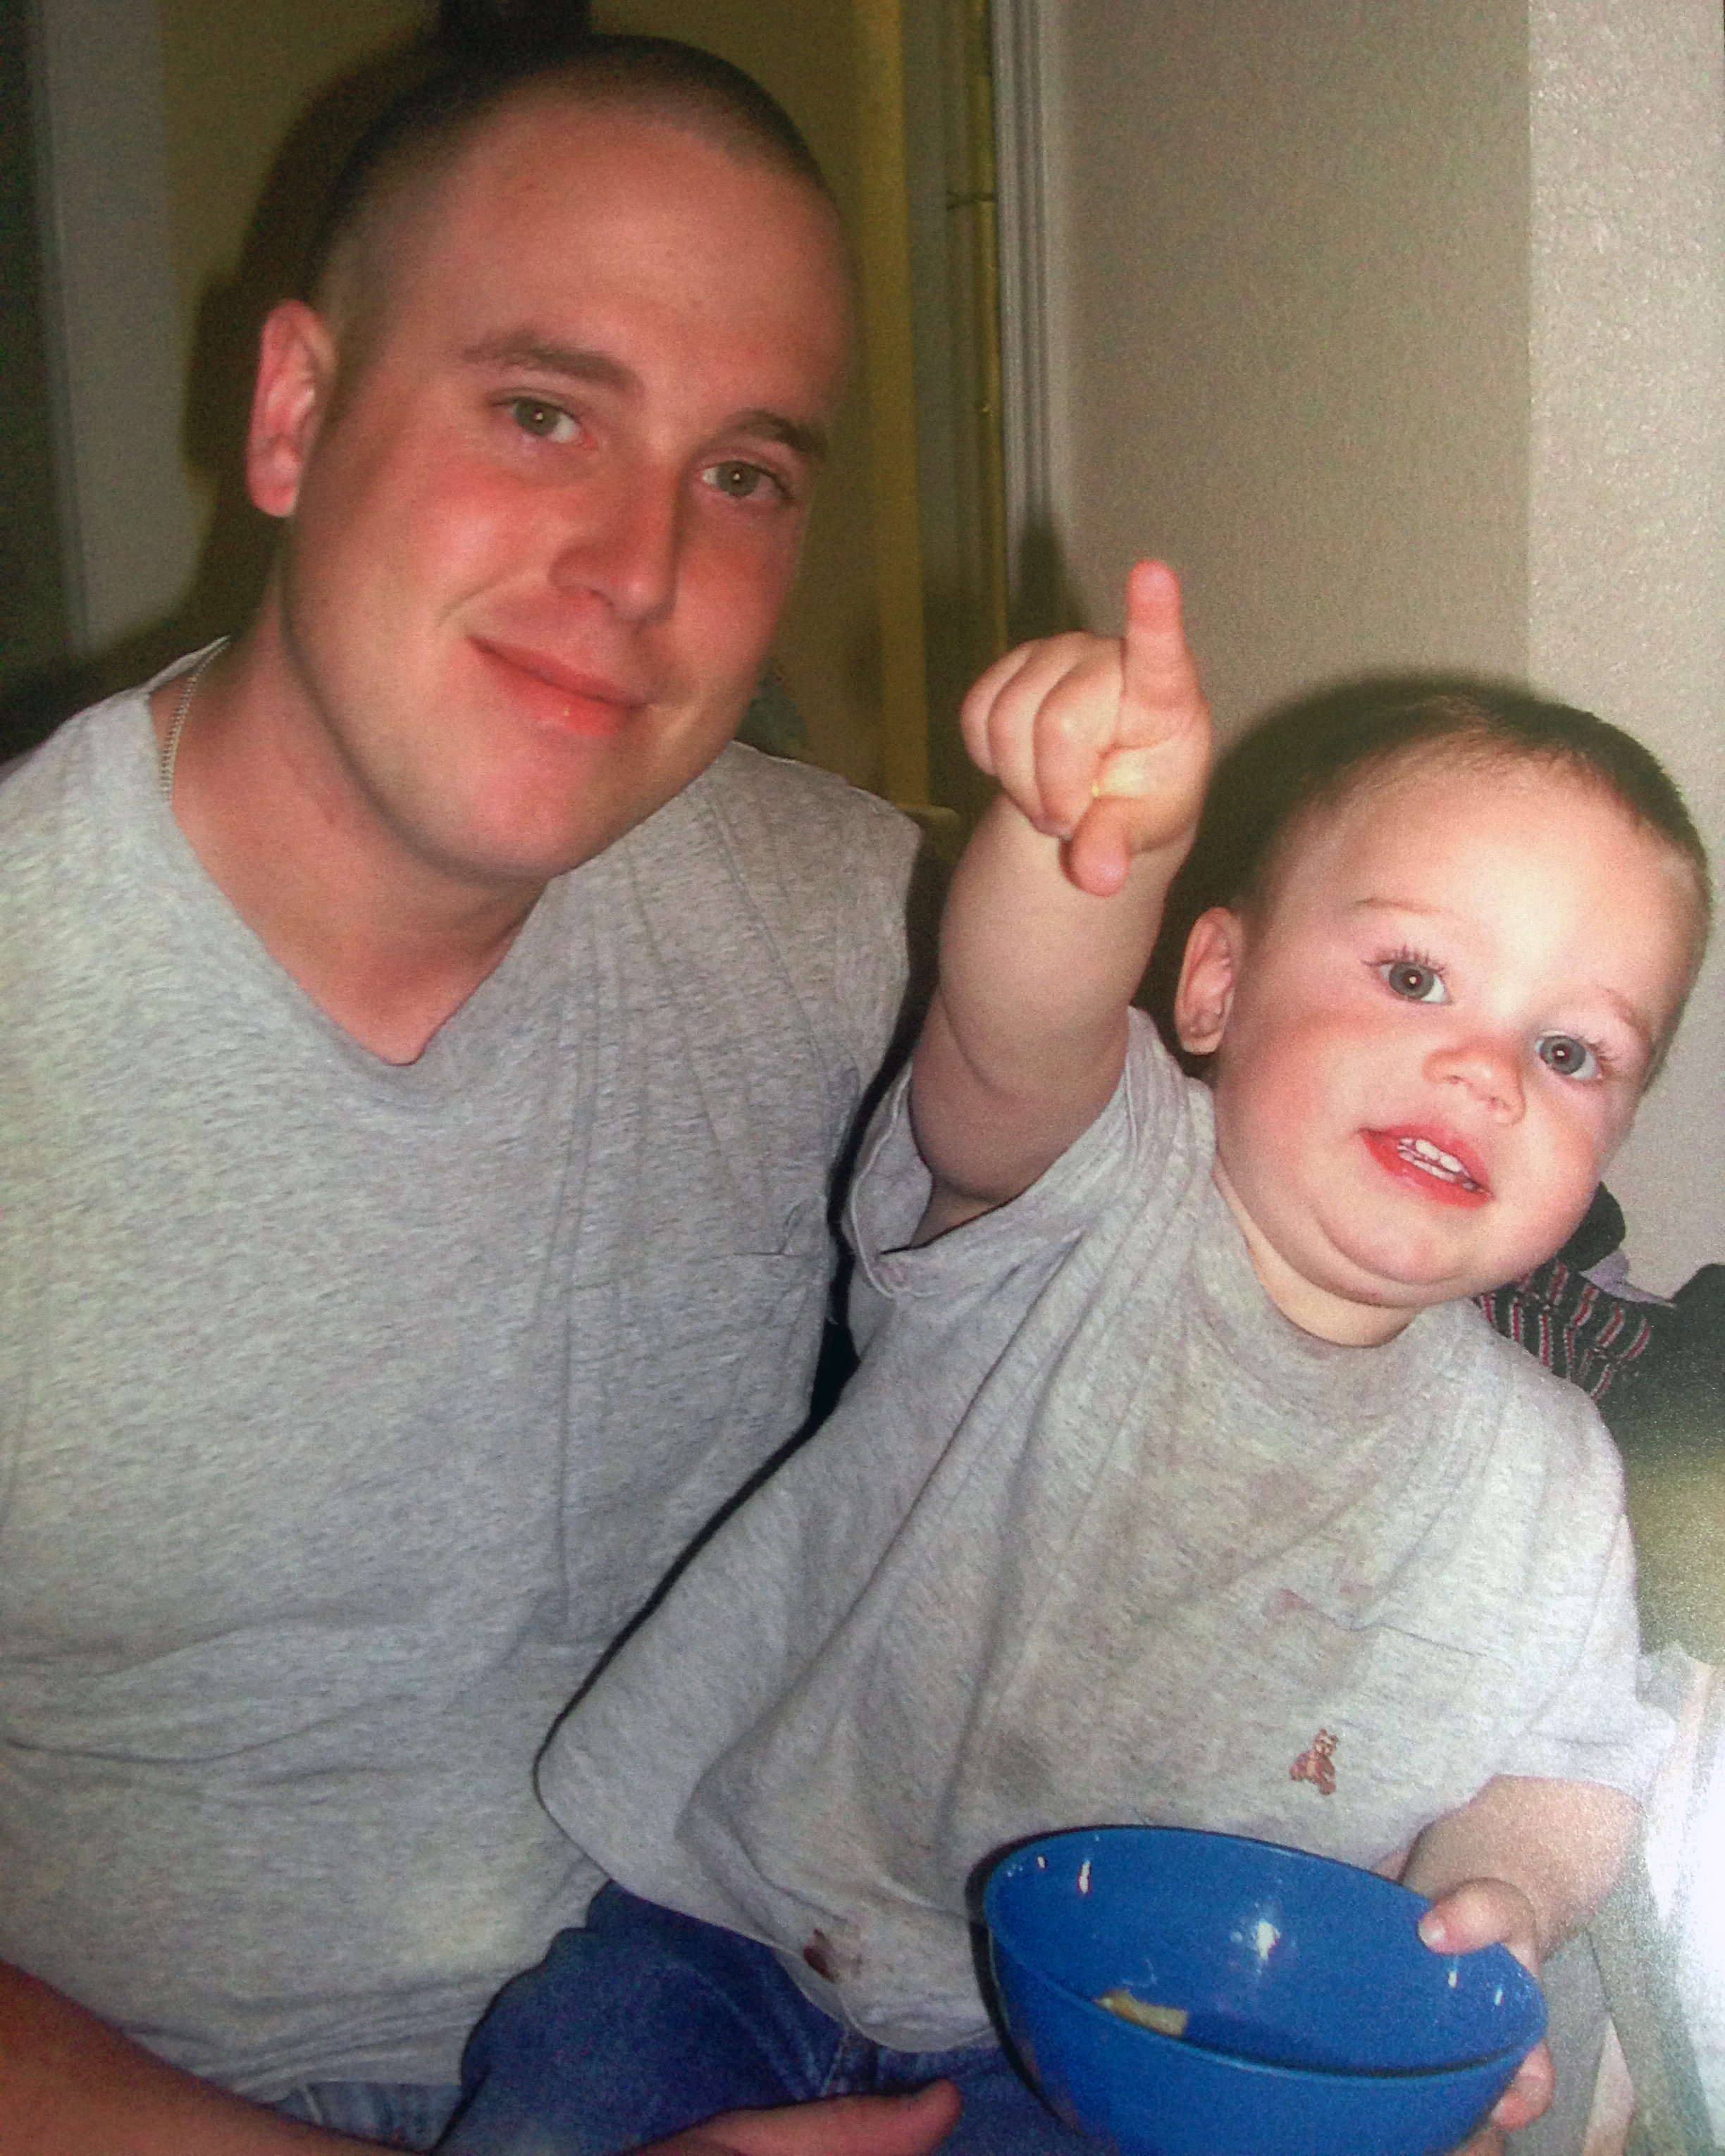 Army Sgt. Daniel Methvin and his son, Elijah, before the soldier was killed in Iraq in 2003. (Family photo)